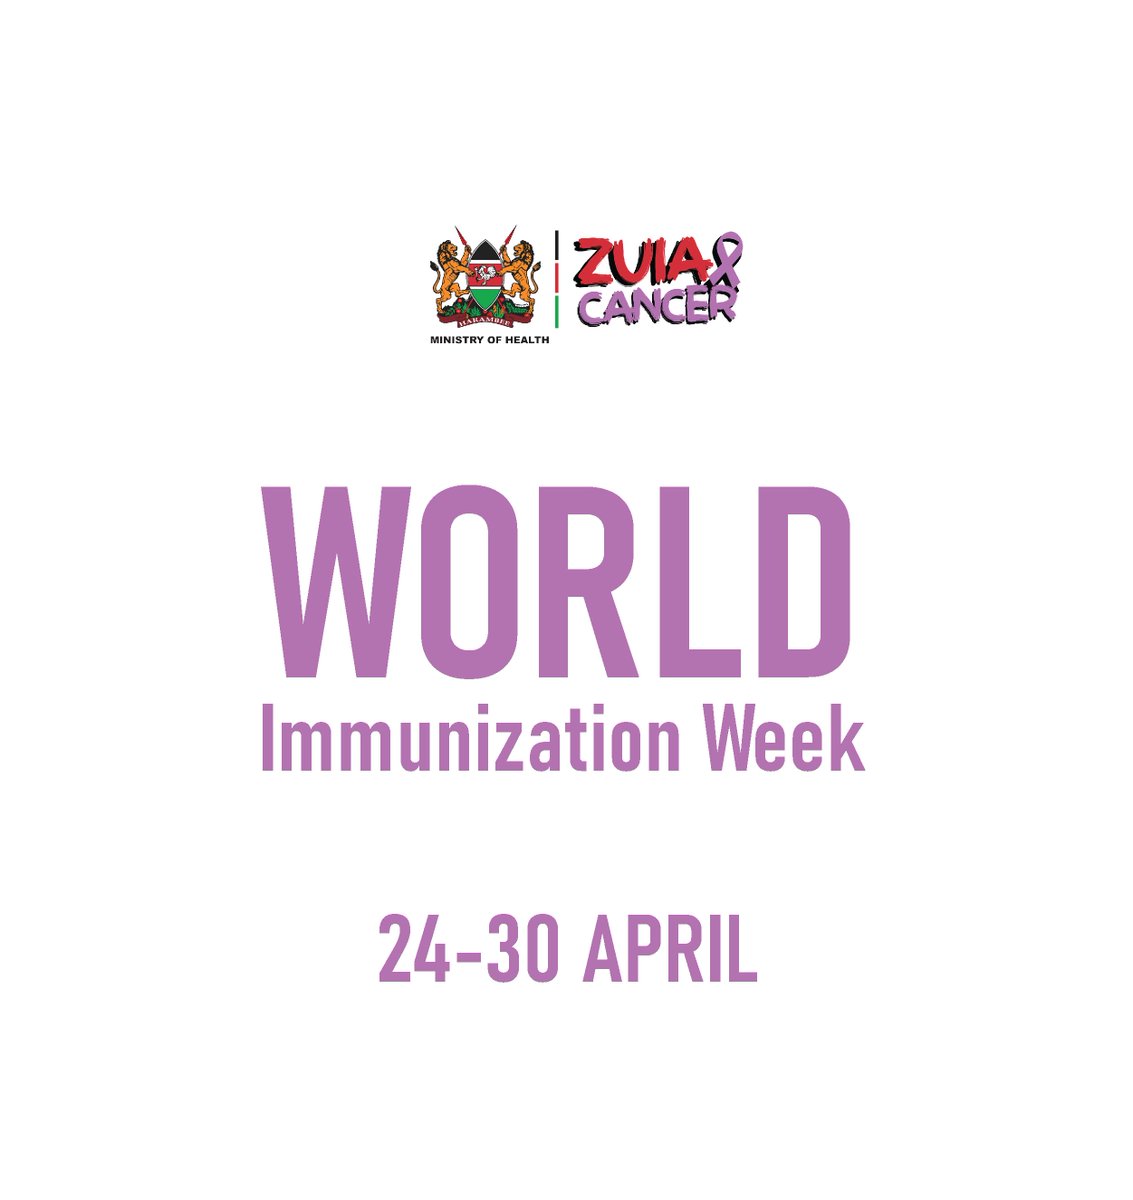 World Immunization Week aims to highlight the collective action needed to protect people from vaccine-preventable diseases. The goal is for more children, adults – and their communities – to be protected from vaccine-preventable diseases. #VaccinateToProtect #VaccinesSavesLives